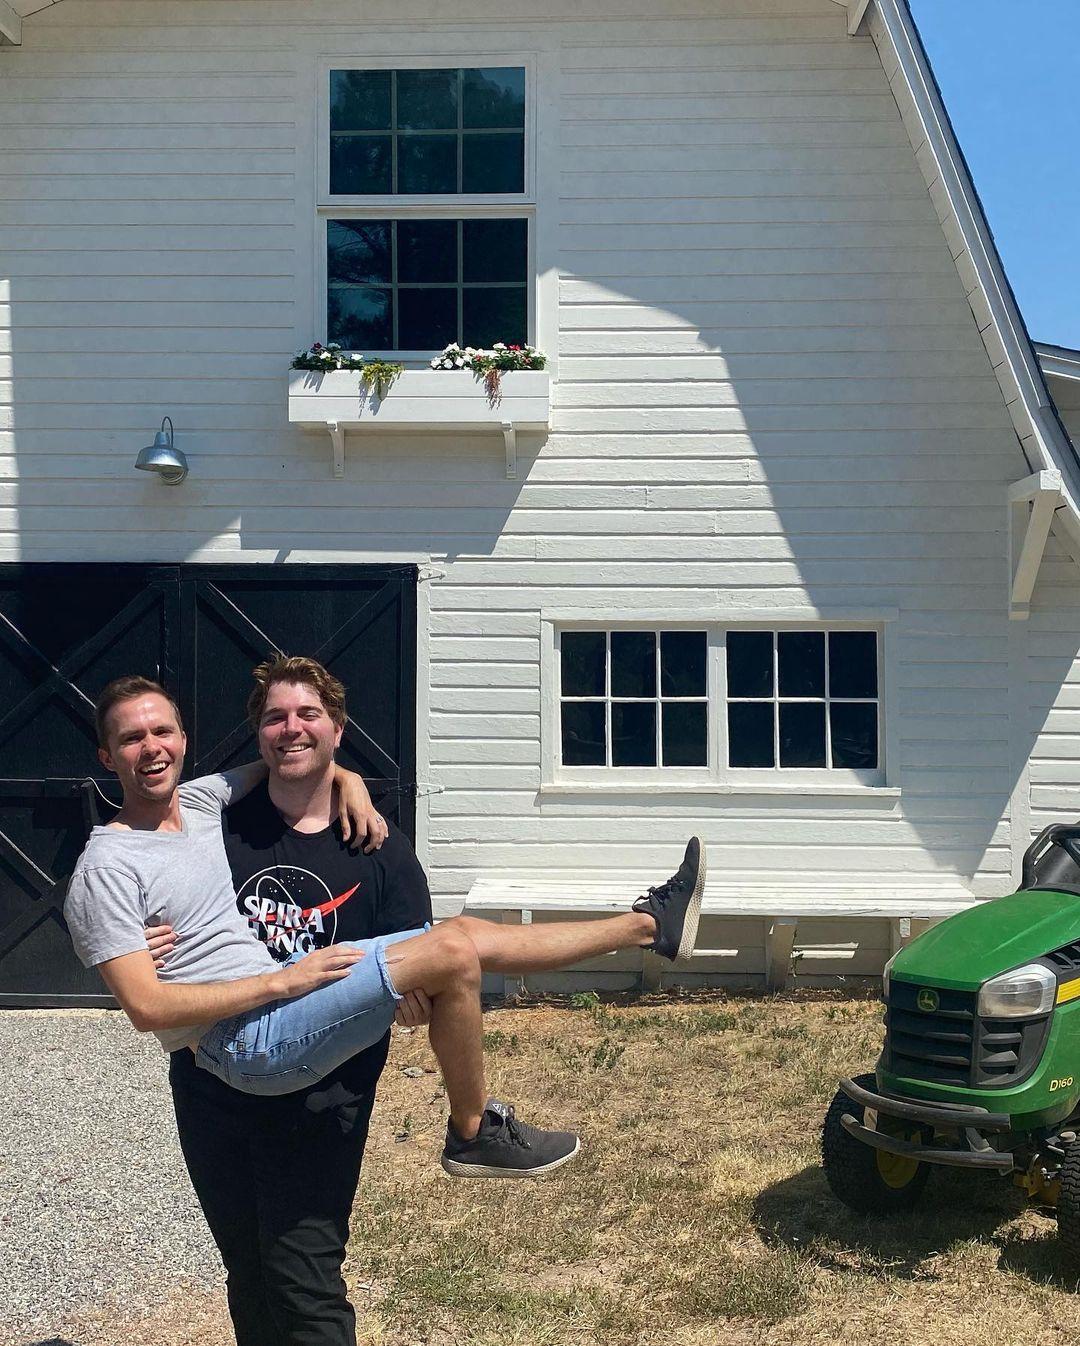 A photo showing Shane Dawson and his lover, Ryland Adams goofing around.